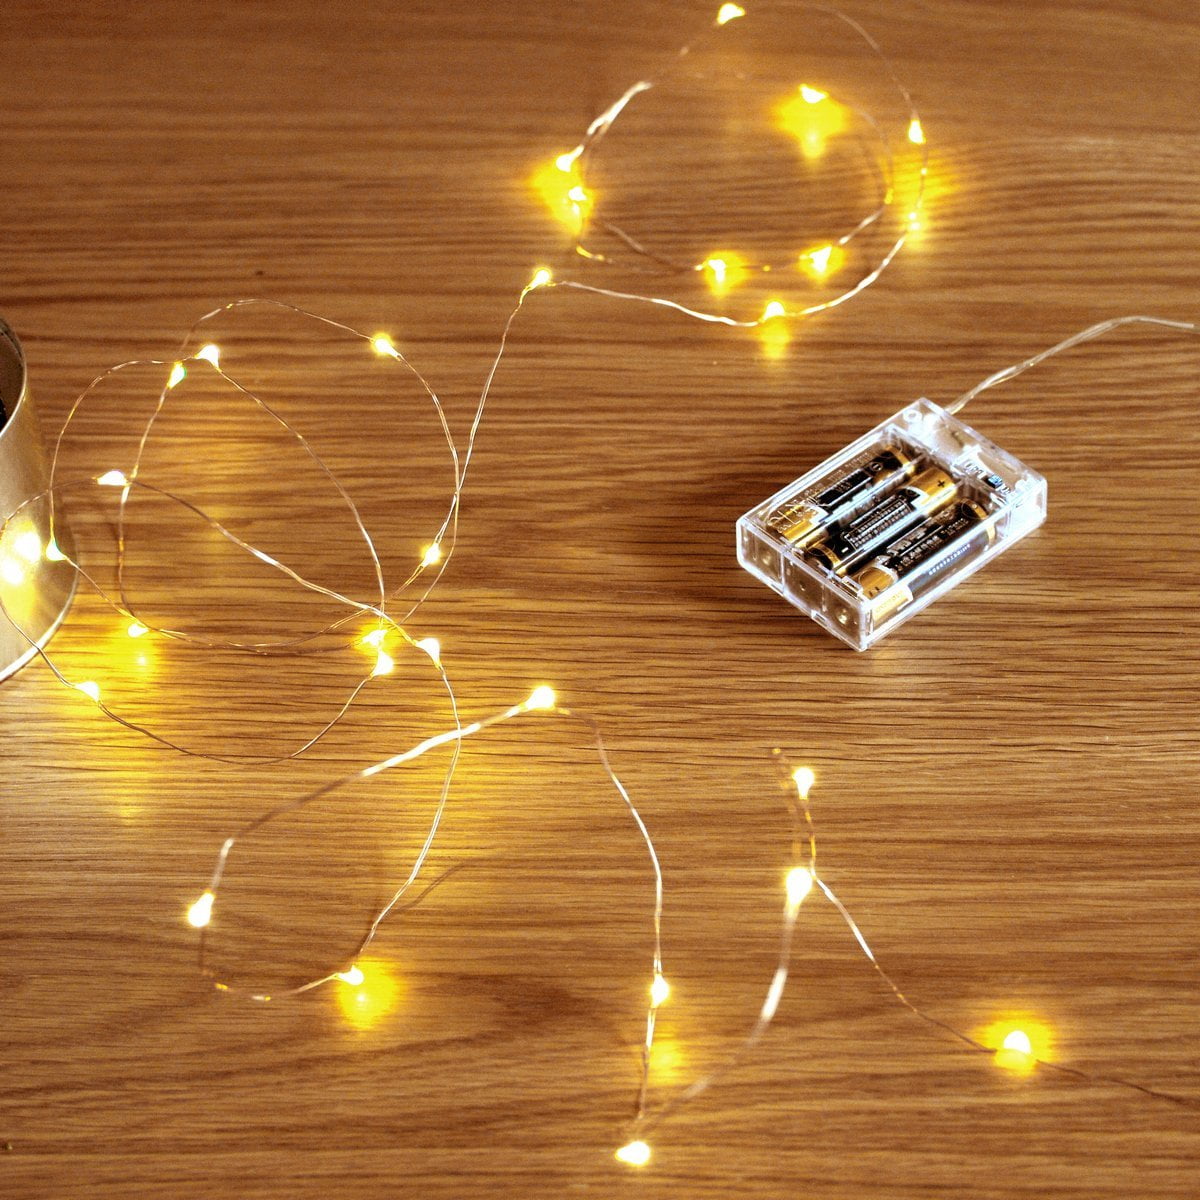 Led String Lights Sanniu Mini Battery Powered Copper Wire Starry Fairy